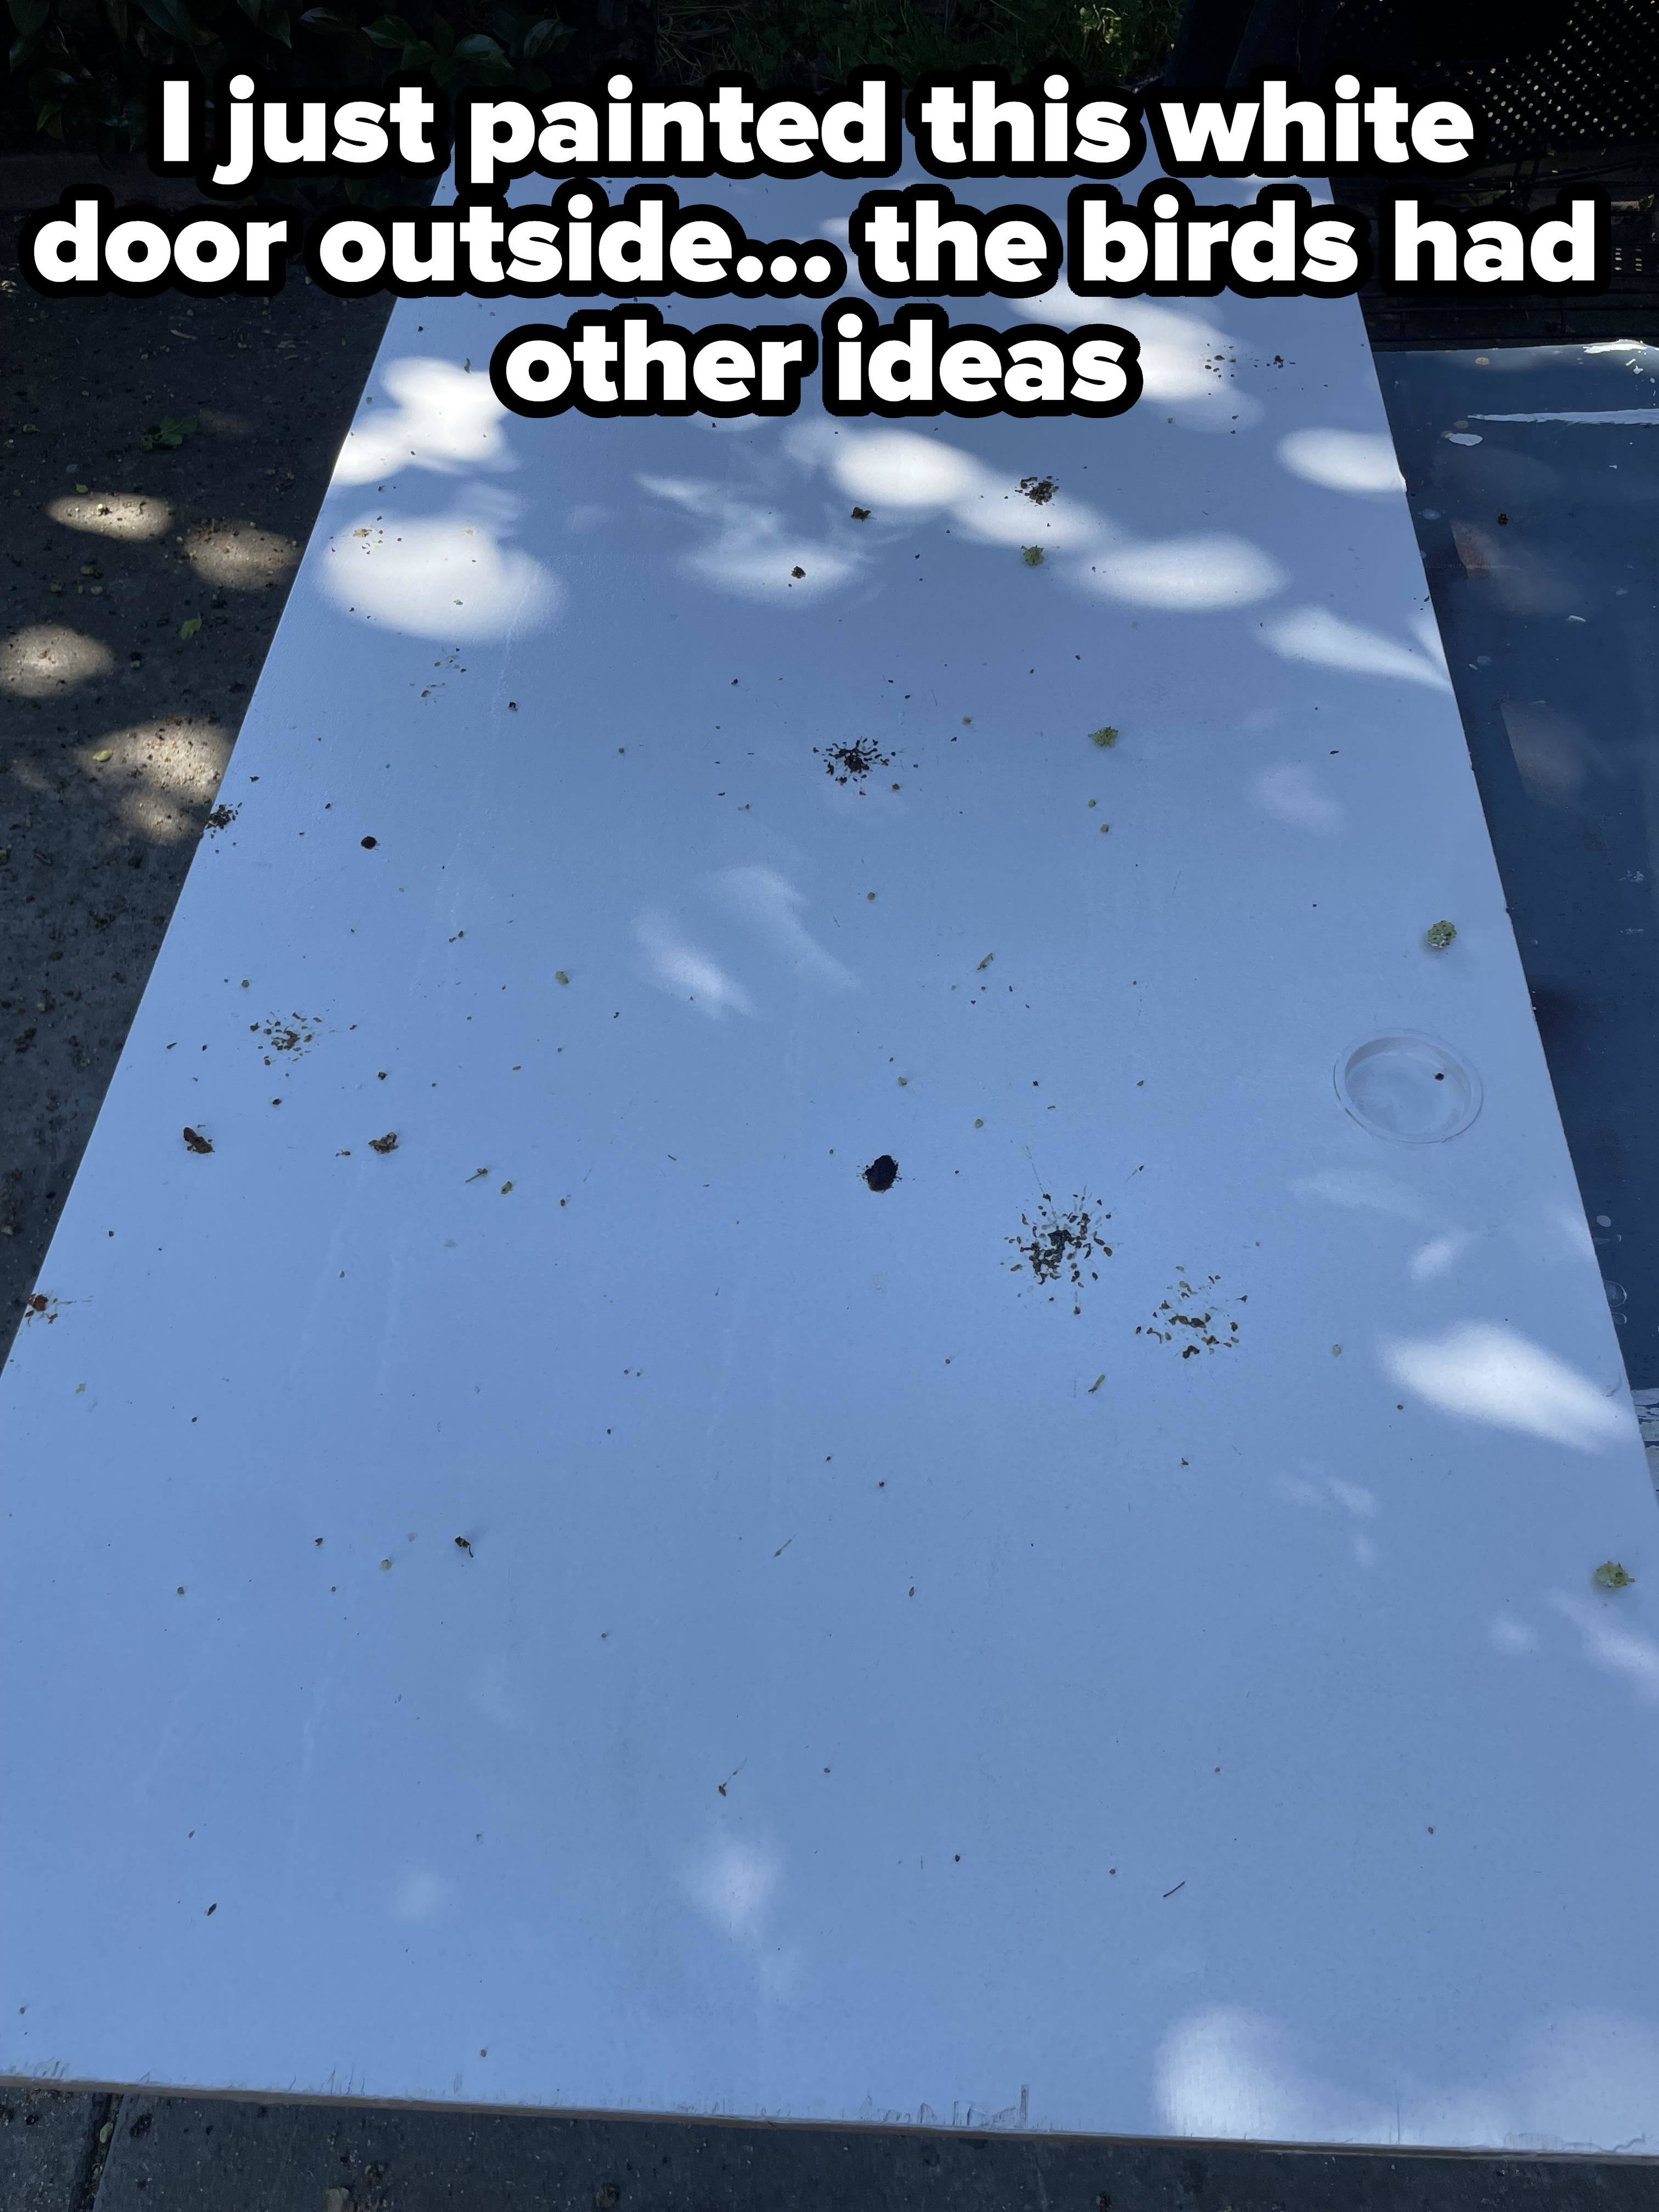 A white outdoor table with leaf shadows and small debris scattered on the surface